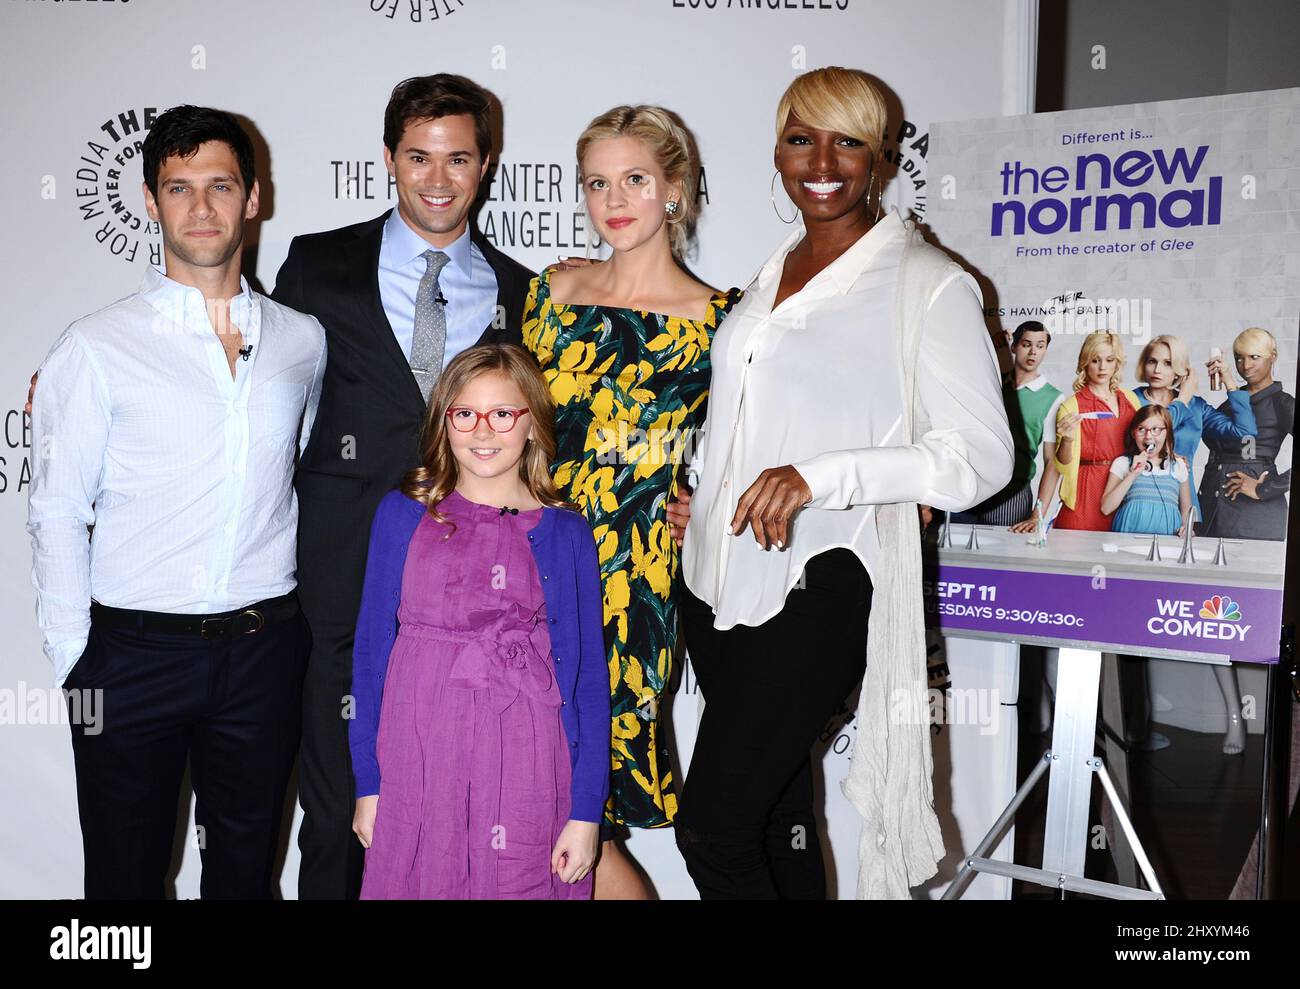 Justin Bartha, Andrew Rannells, Georgia King, Bebe Wood and NeNe Leakes attending the 2012 Fall TV Preview for NBC's 'The New Normal' attending the 2012 Fall TV Preview for NBC's 'The New Normal' at Paley Convention Centre, California.. Stock Photo